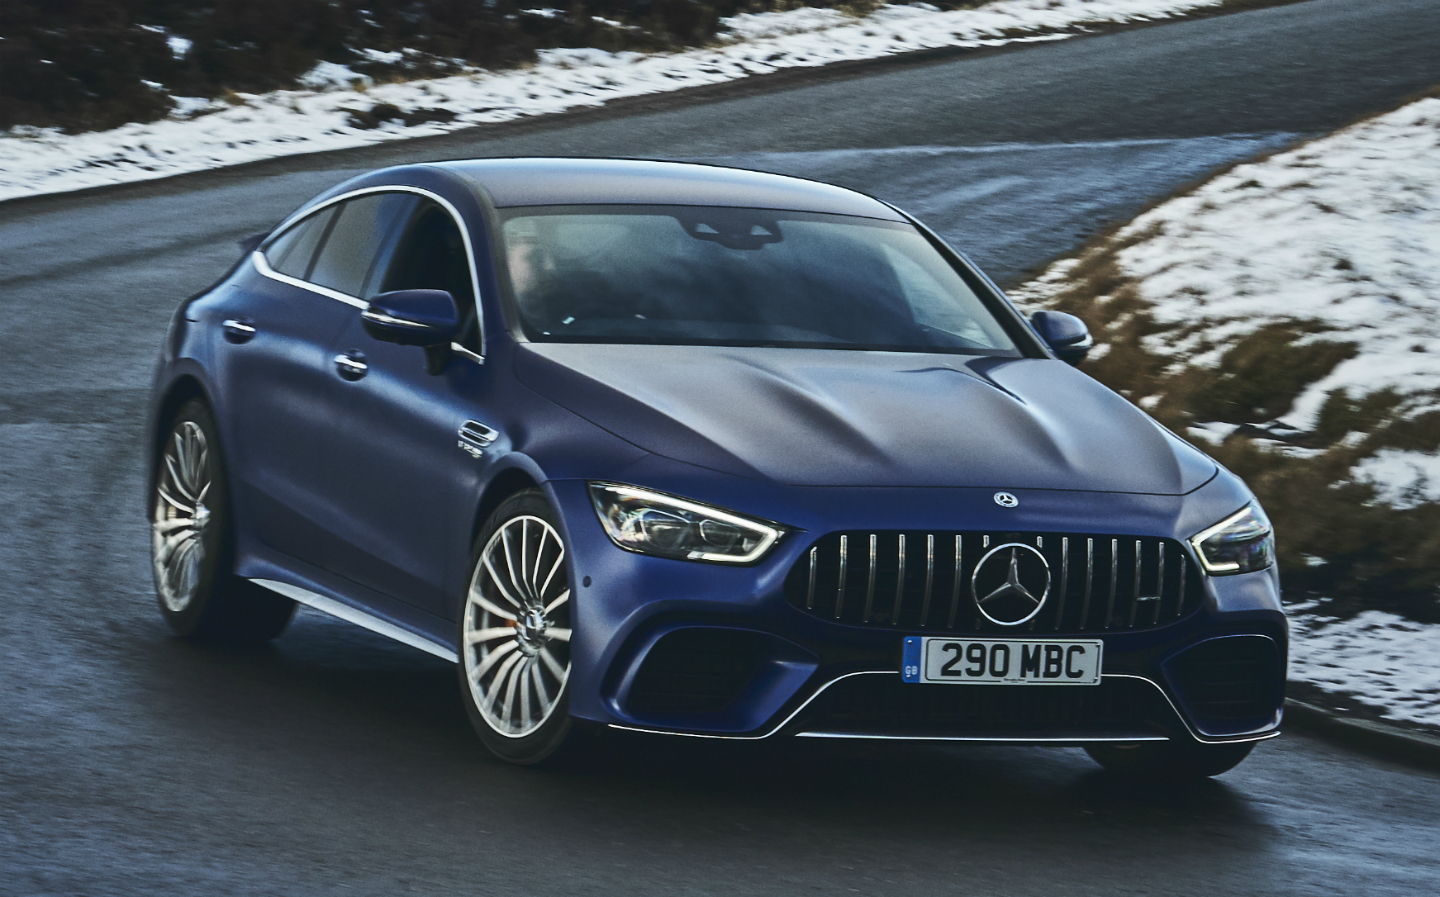 Jeremy Clarkson: the Mercedes-AMG GT 63 S 4-door is perfect for pissing off millennials